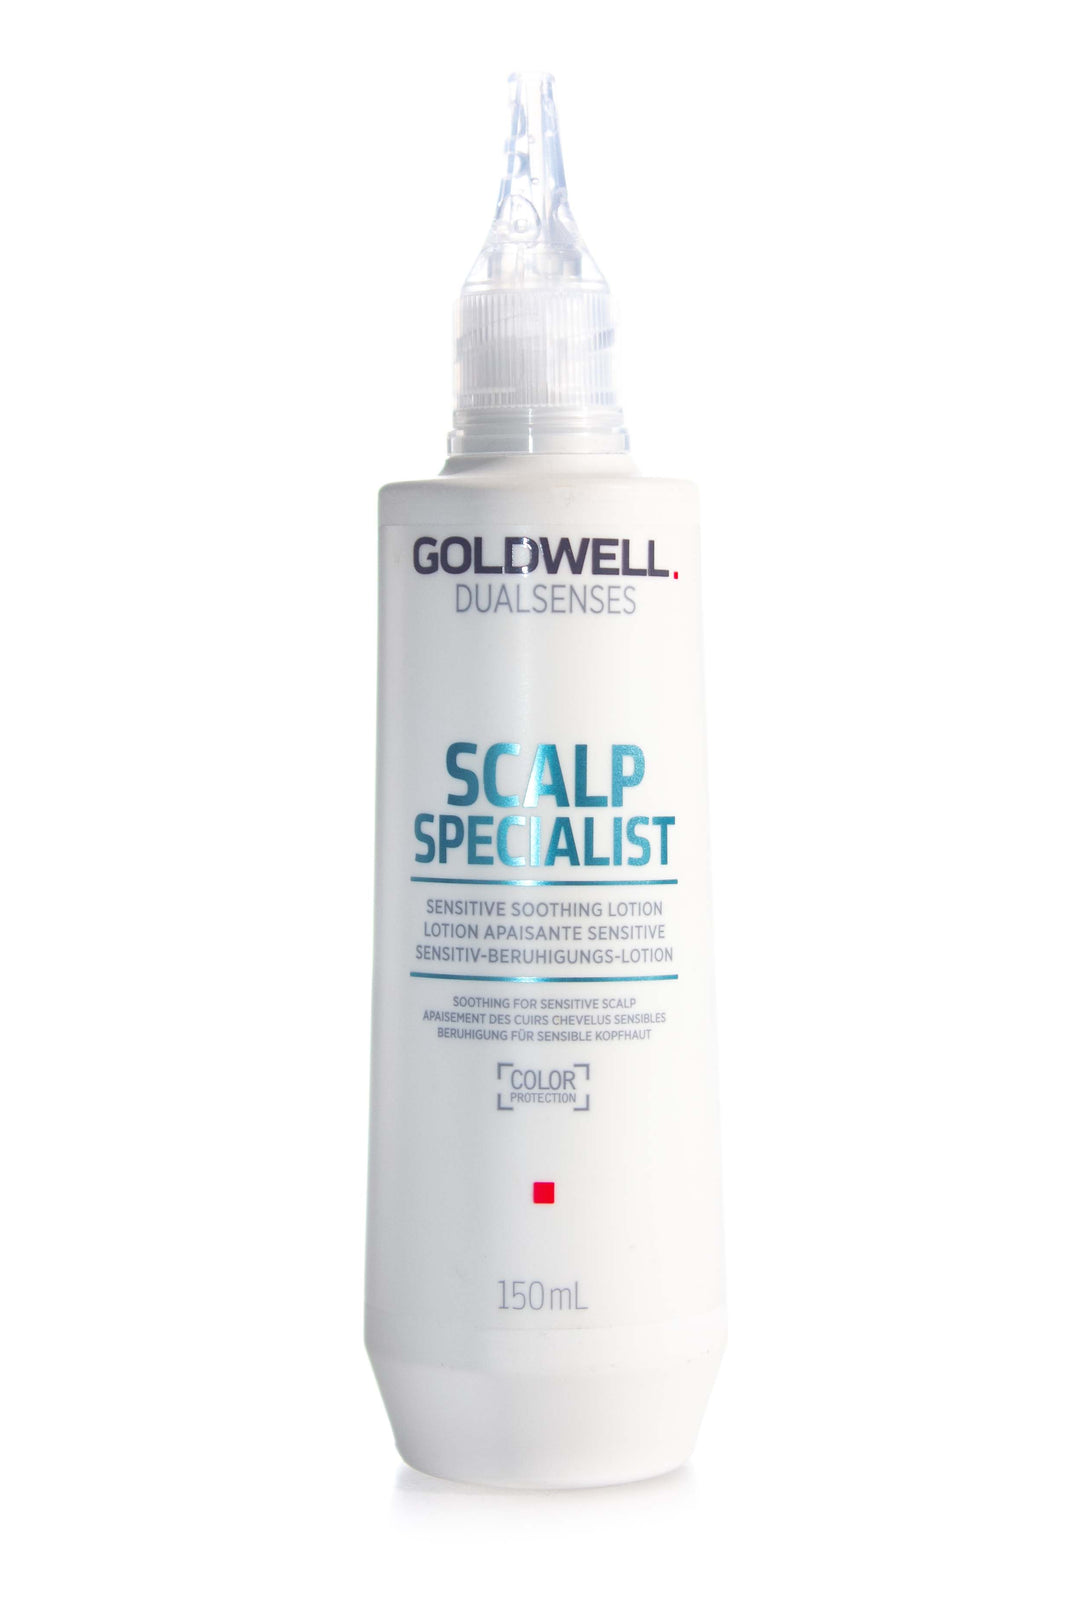 GOLDWELL Dual Senses Scalp Specialist Sensitive Soothing Lotion | 150ml